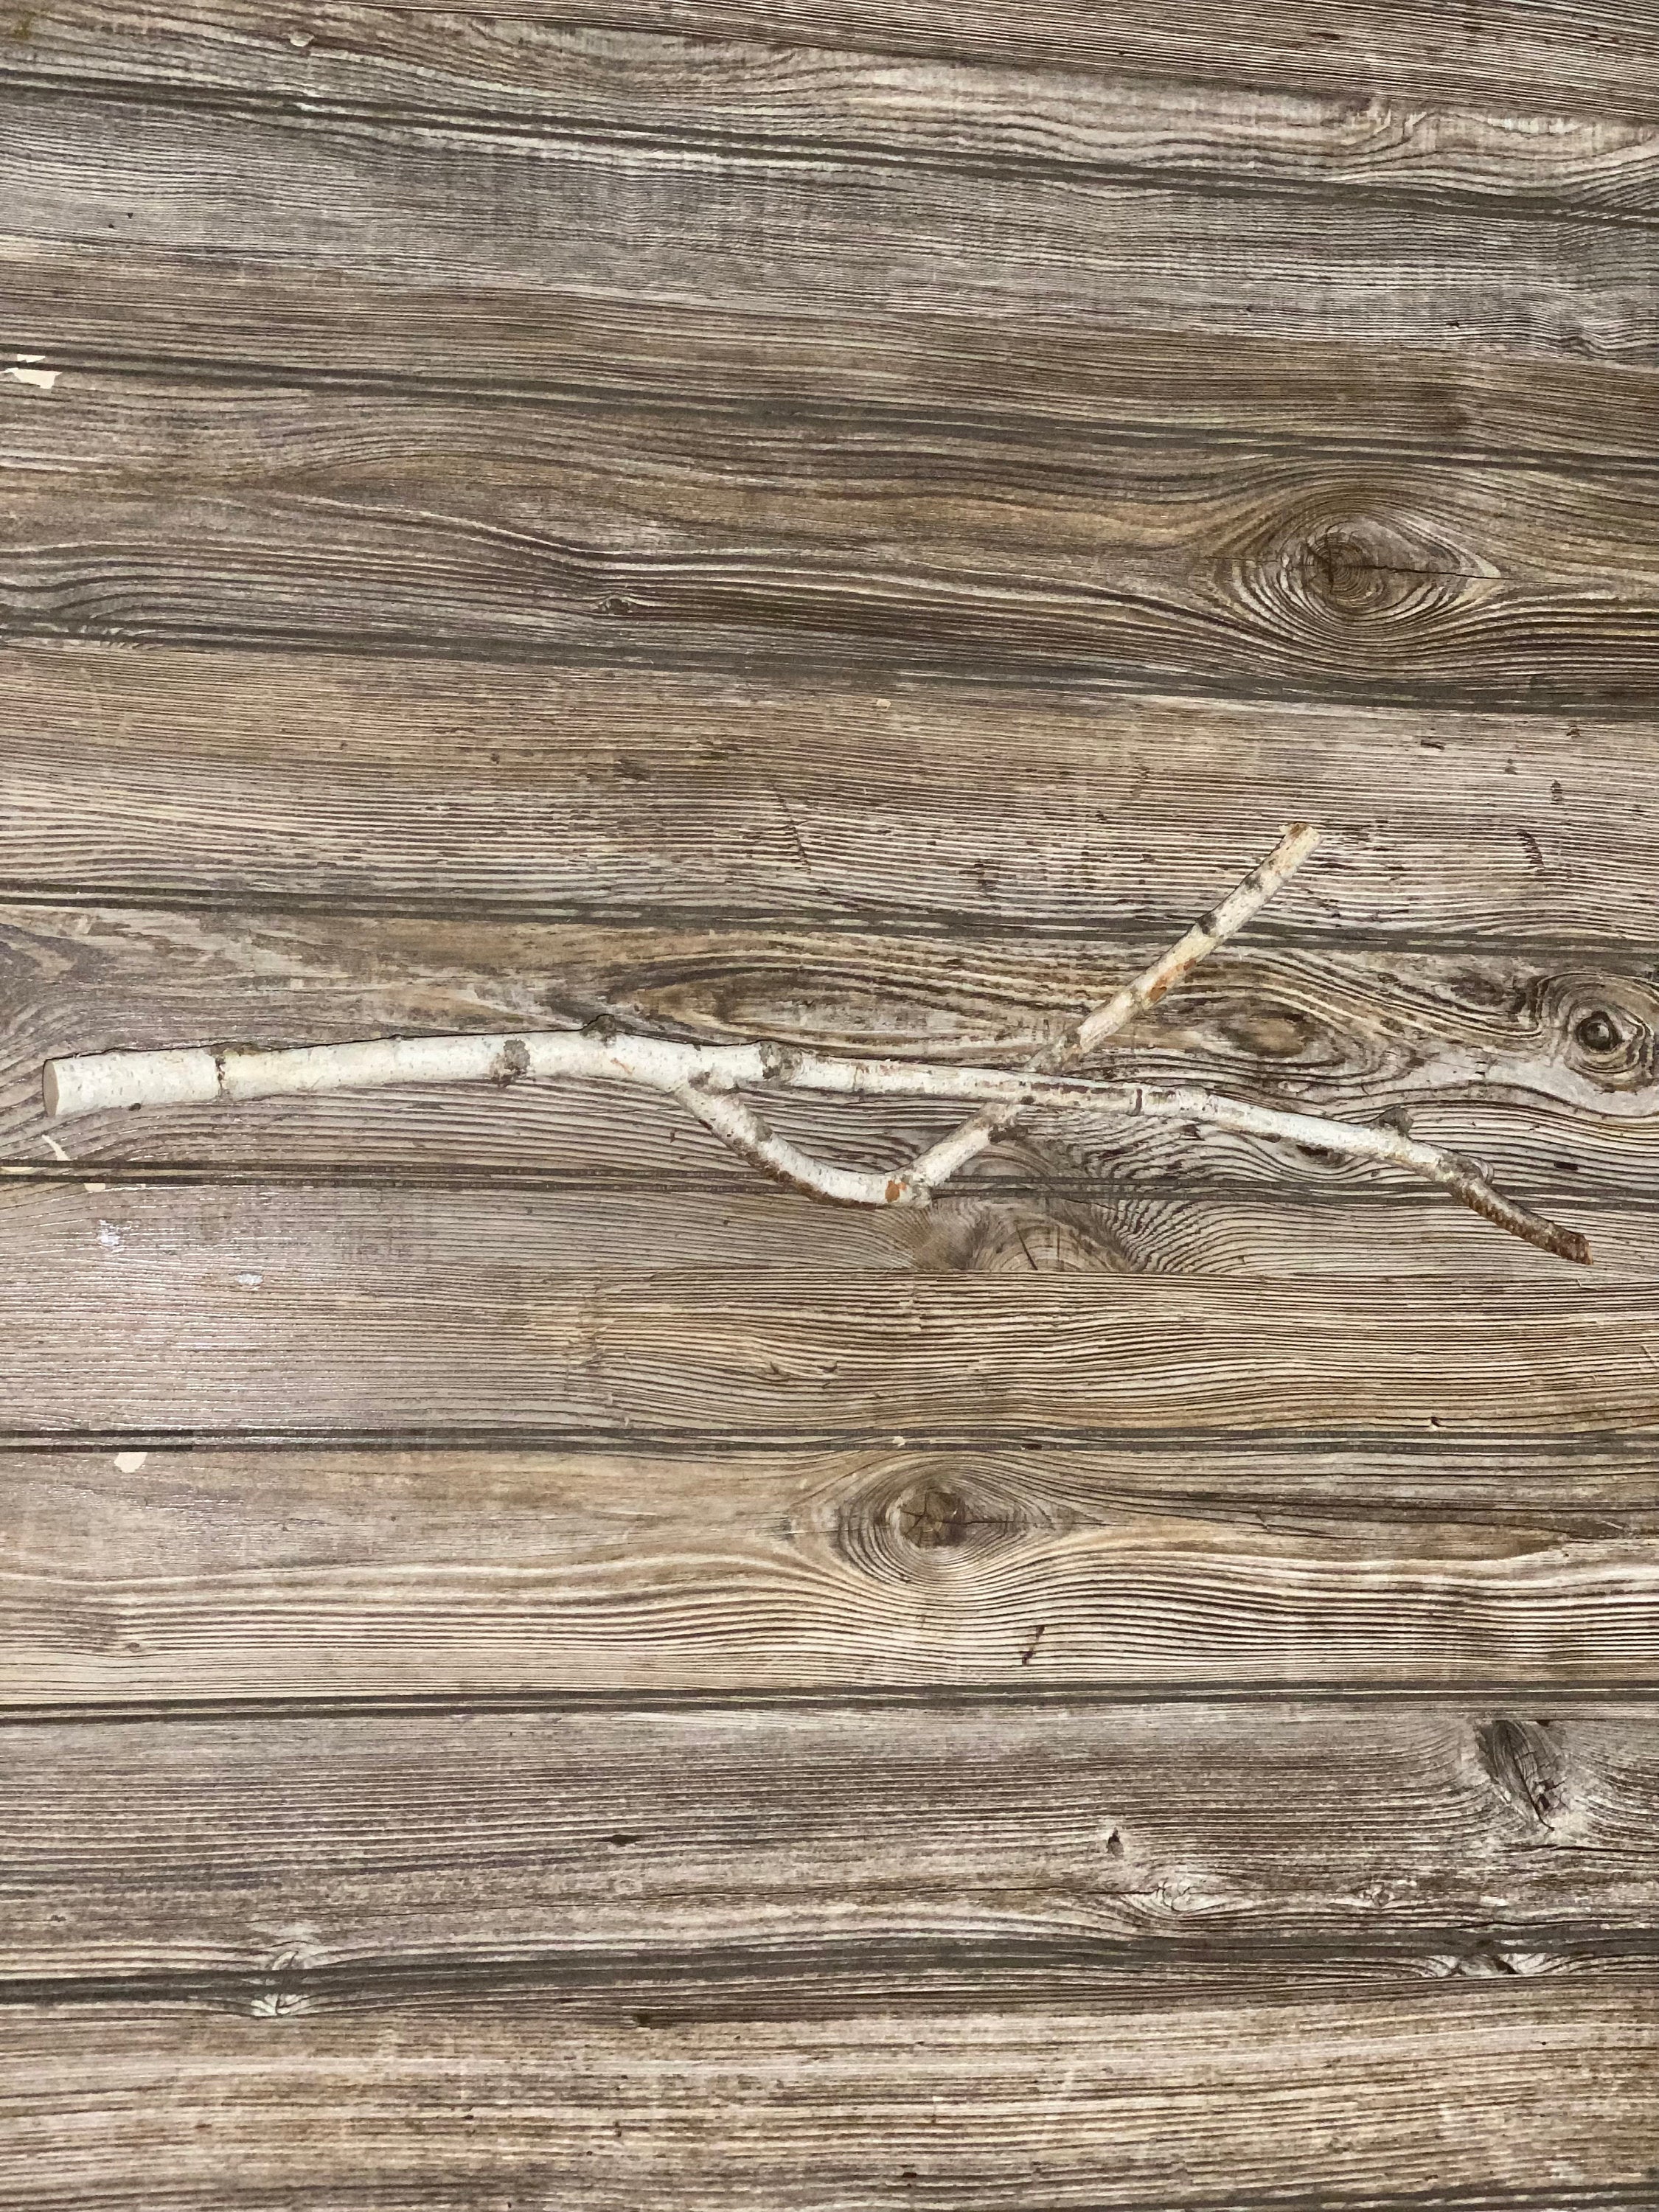 Twisted White Birch Branch, 1 Count, Approximately 23 Inches Long by 3/4 Inch Thick